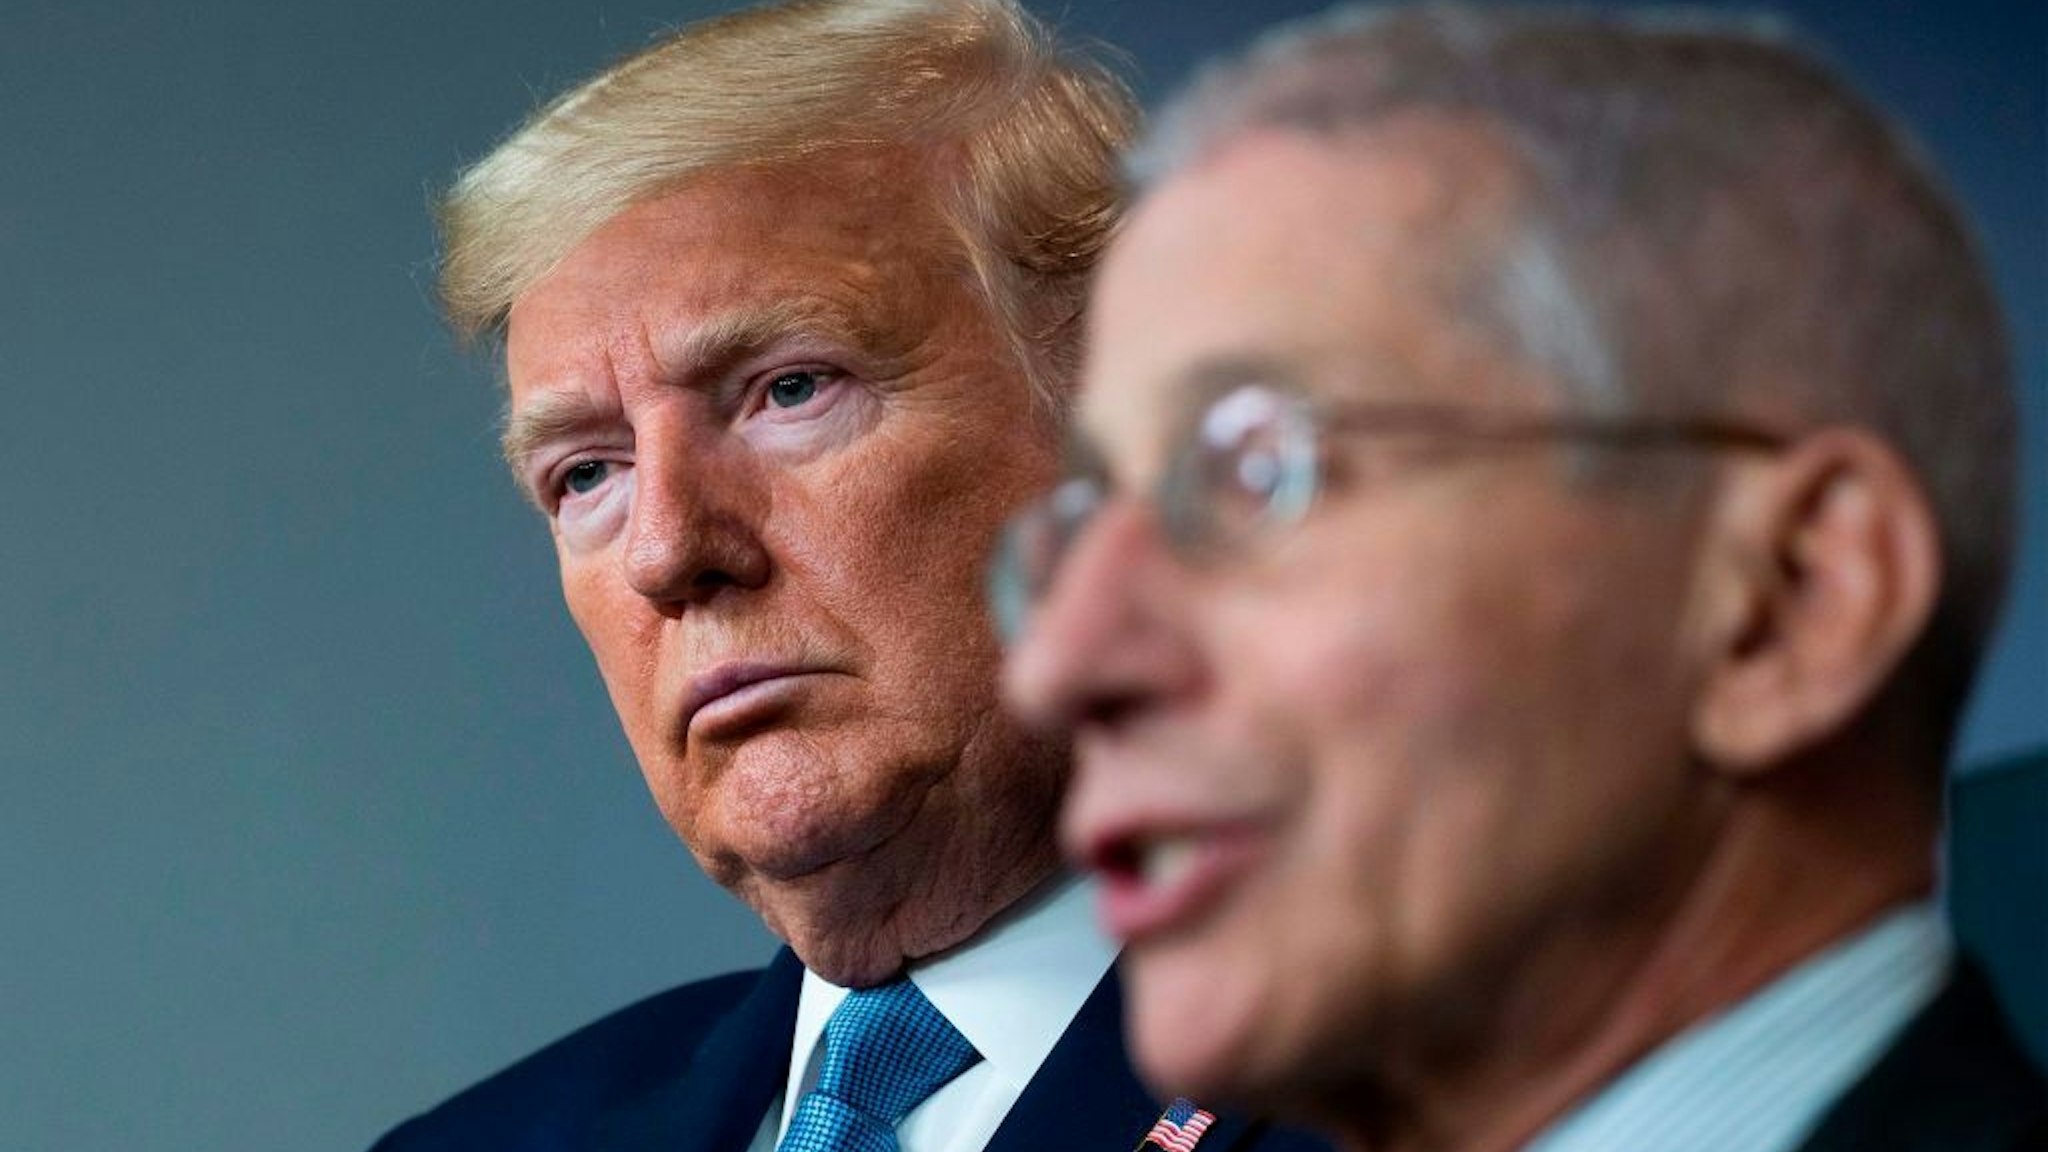 US President Donald Trump listens as National Institute of Allergy and Infectious Diseases Director, Dr. Anthony Fauci, speaks during the daily briefing on the novel coronavirus, COVID-19, at the White House on March 21, 2020, in Washington, DC. (Photo by JIM WATSON / AFP)